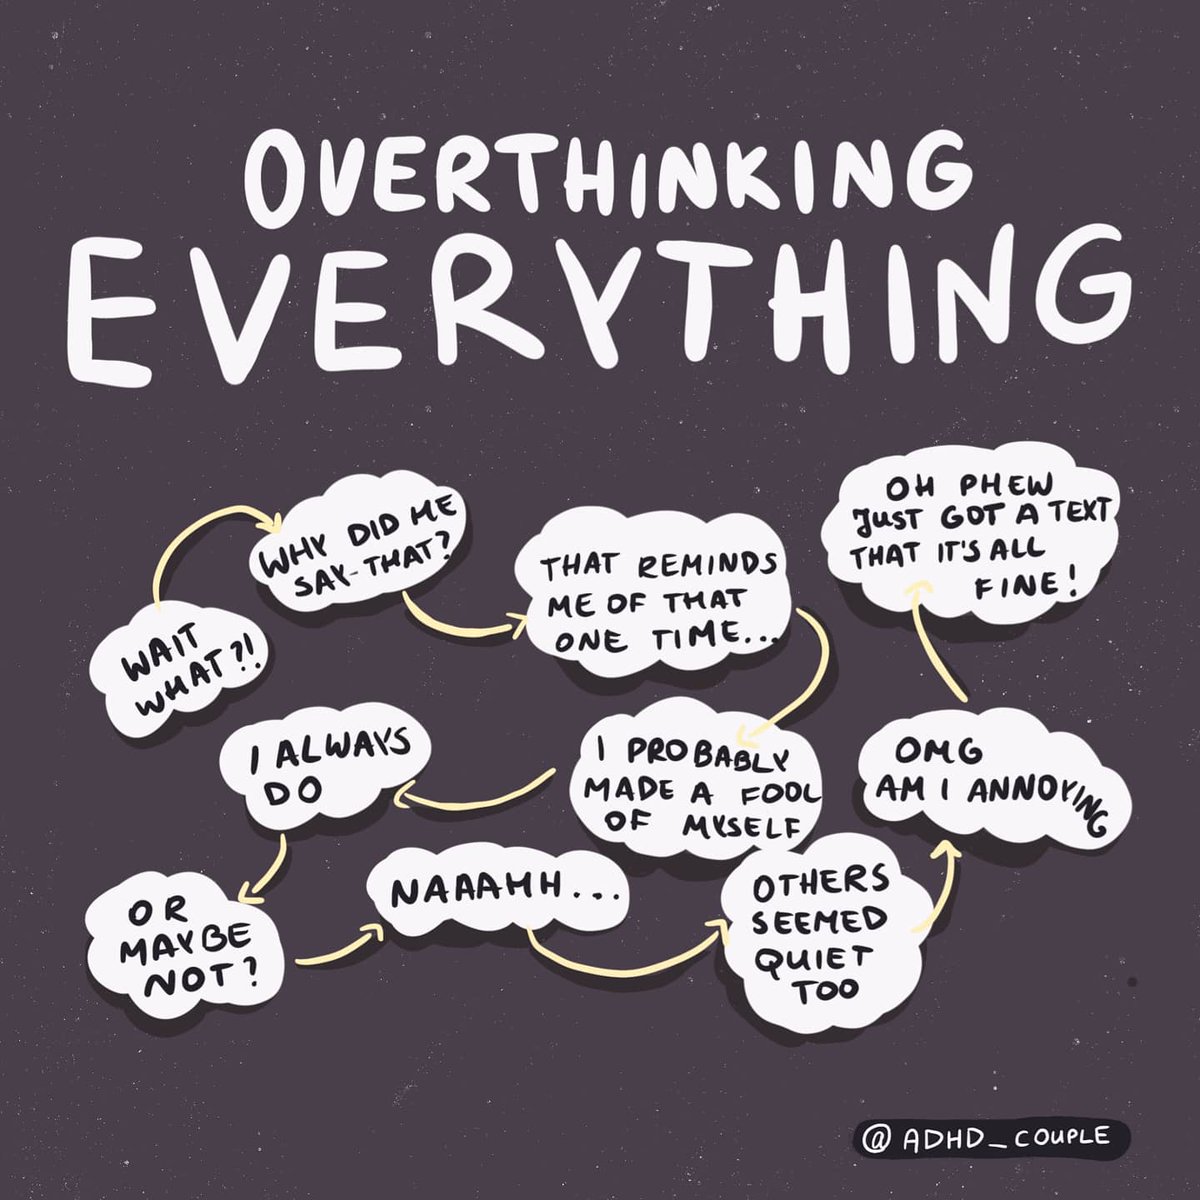 Overthinking is a problem